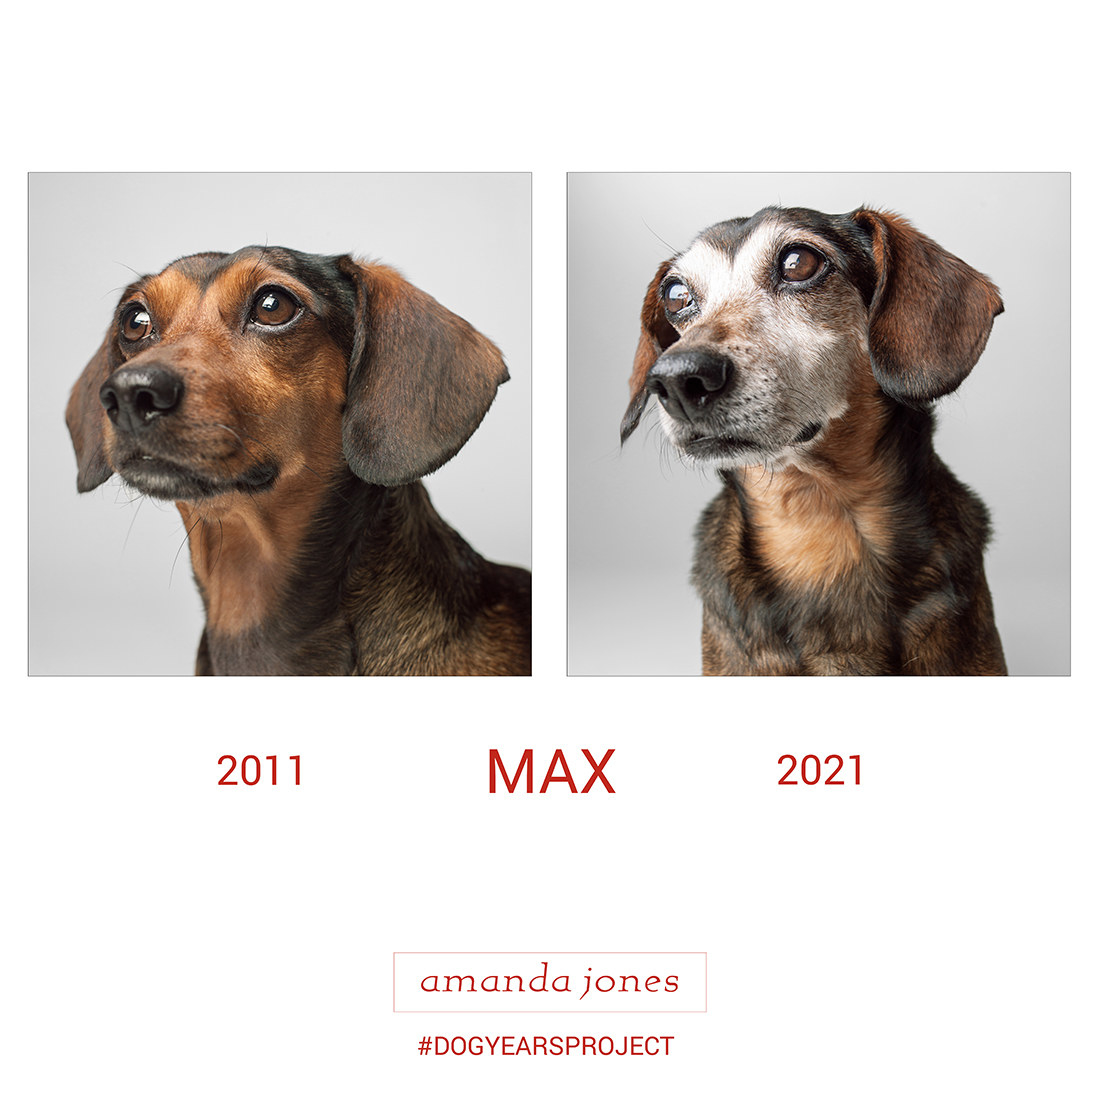 image of a dog taken years apart from 2011 and again in 2021